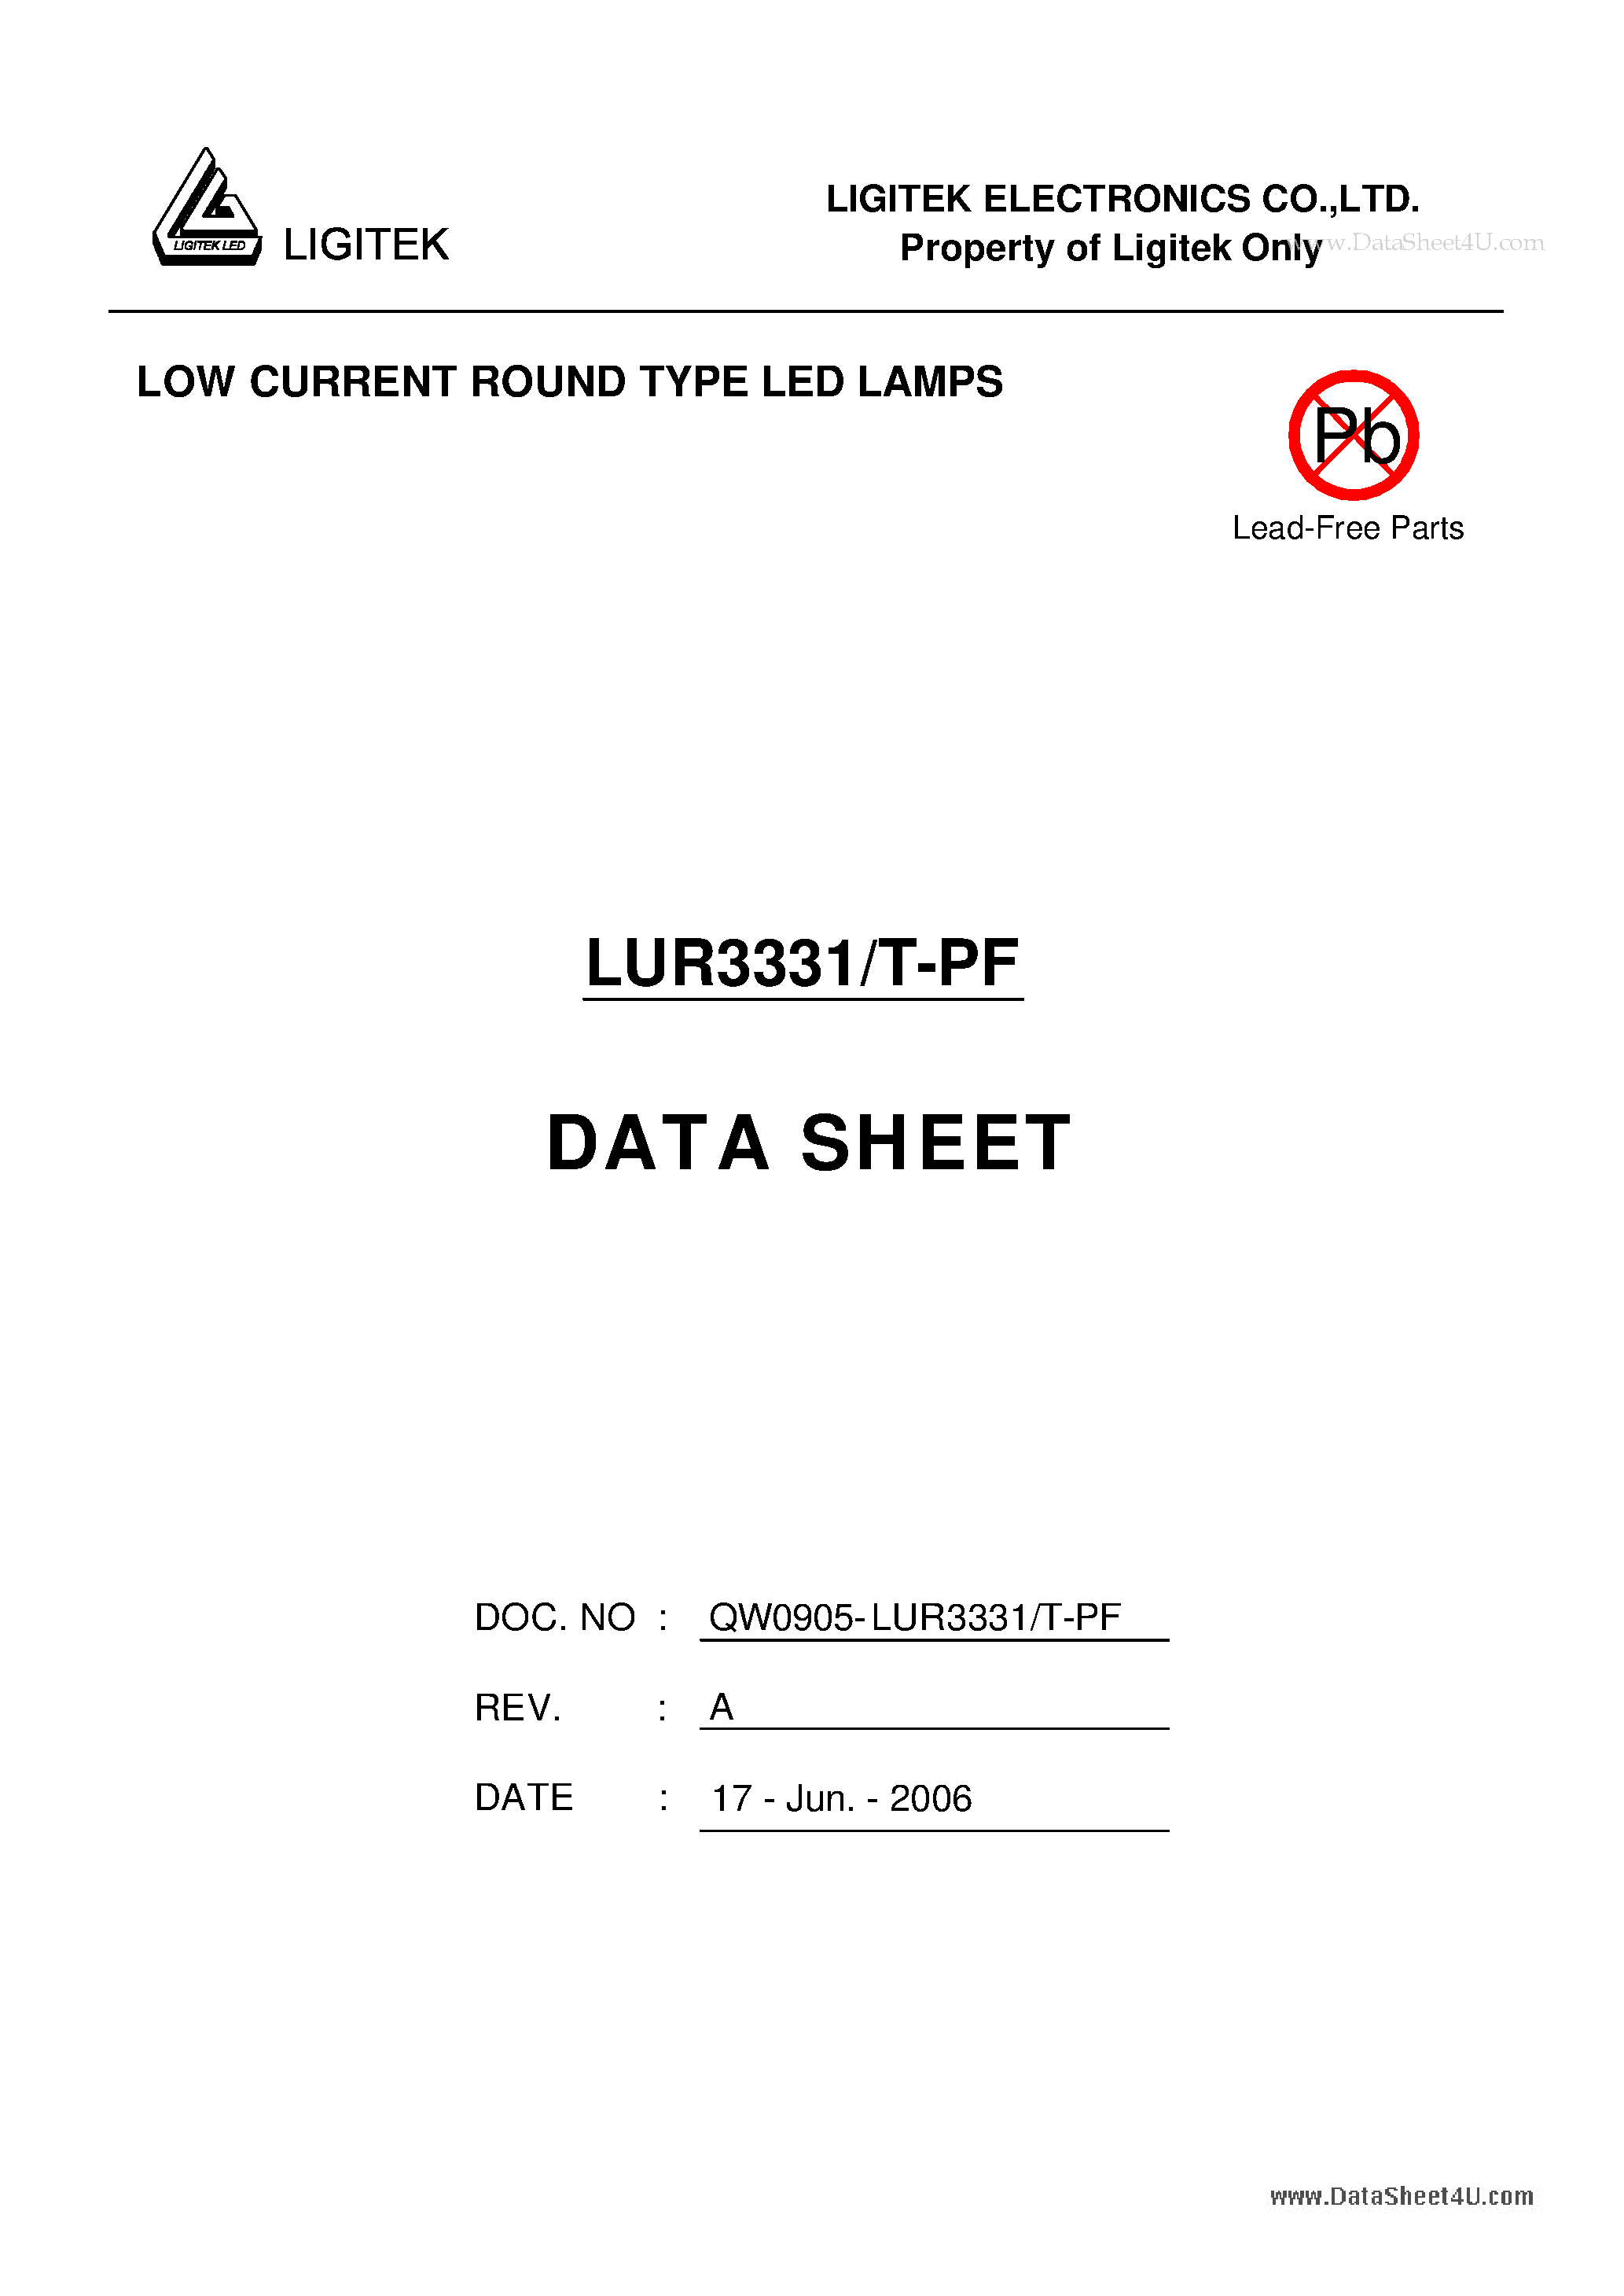 Даташит LUR3331-T-PF - LOW CURRENT ROUND TYPE LED LAMPS страница 1